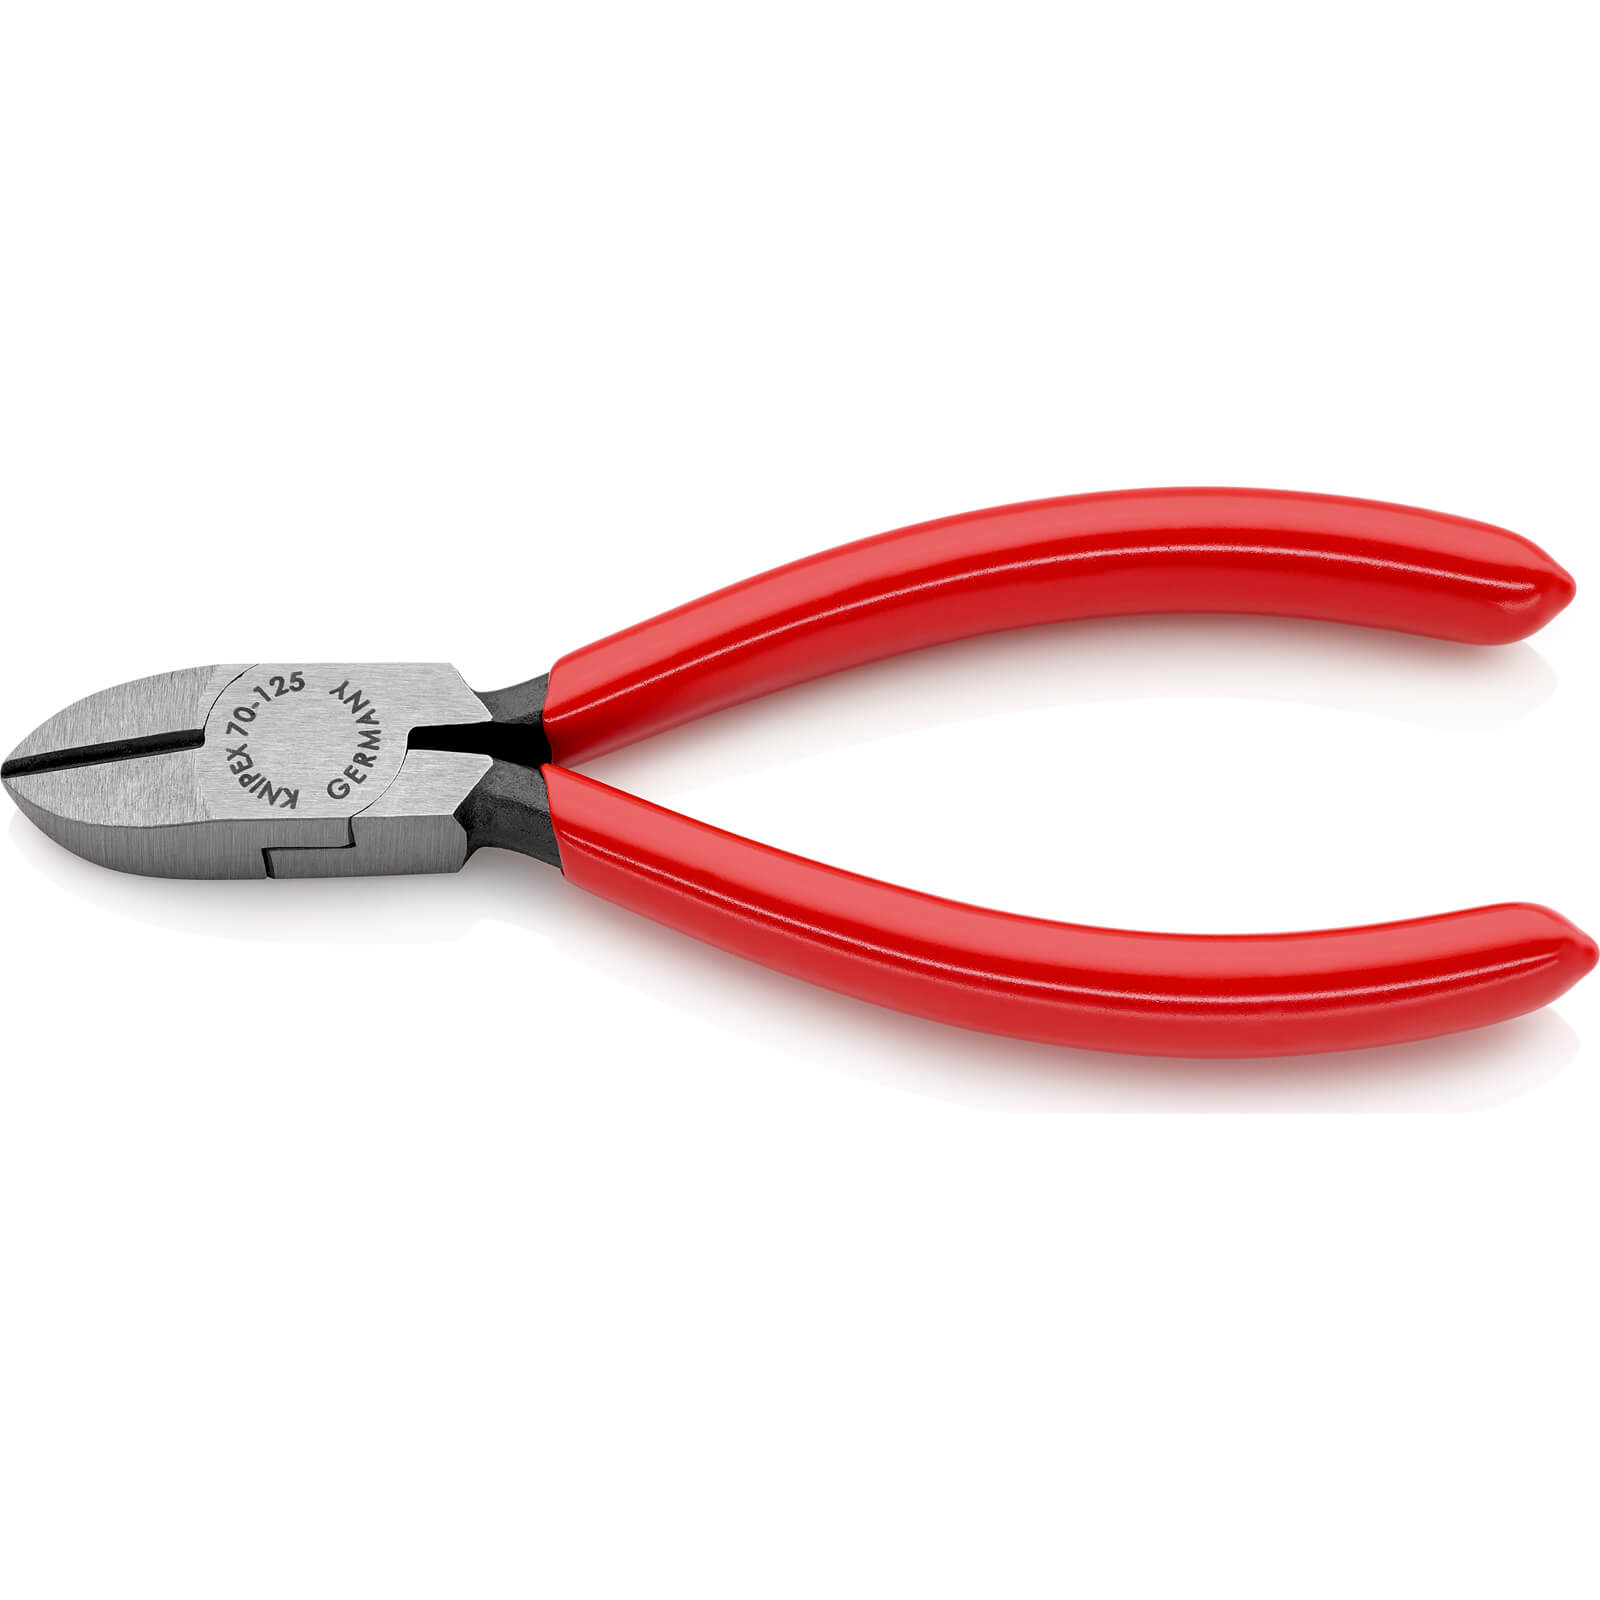 Photo of Knipex 70 01 Diagonal Cutting Pliers 125mm